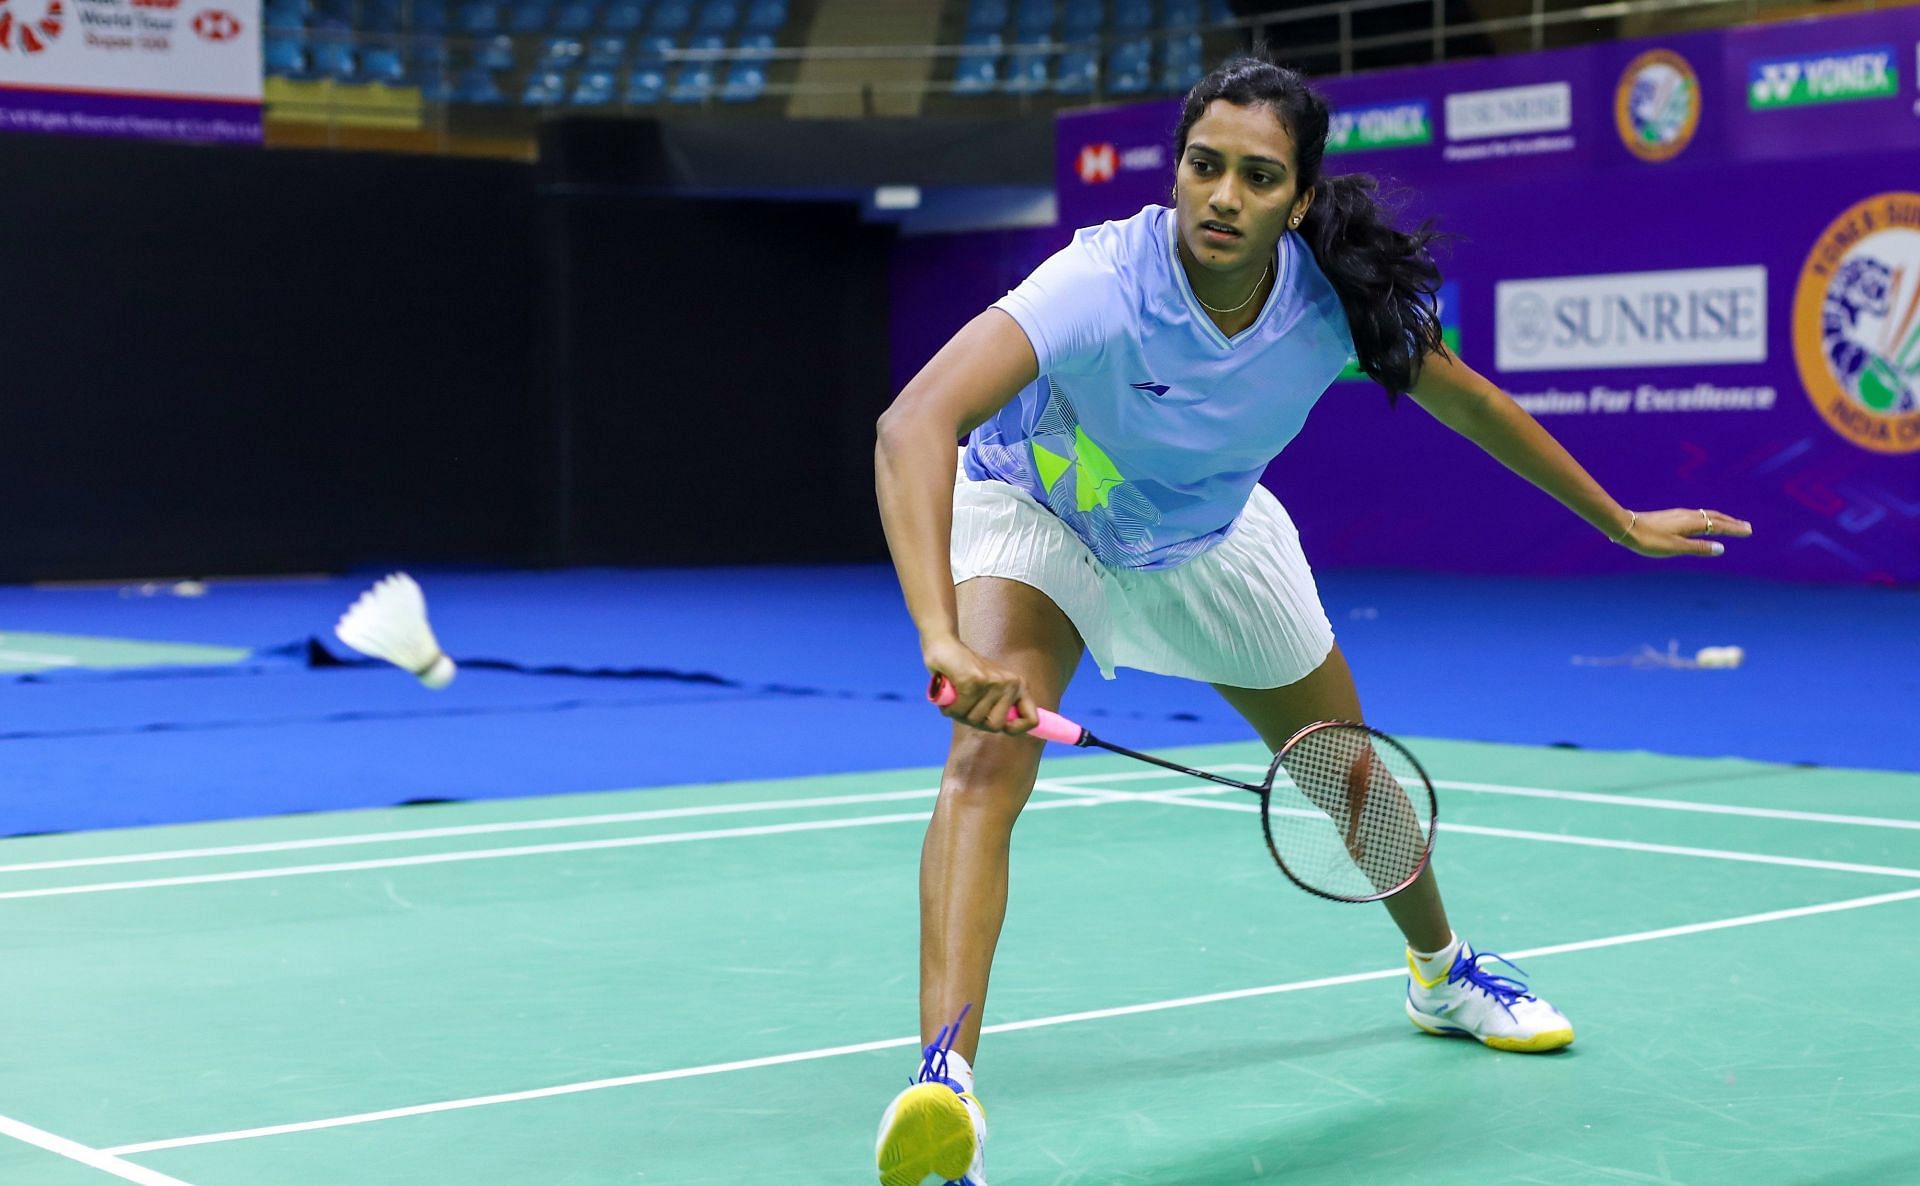 Third seed PV Sindhu beat seventh seed Busanan Ongbamrungphan of Thailand 21-10, 21-16 in the women&#039;s singles quarter-final on Saturday. (Pic credit: BAI)